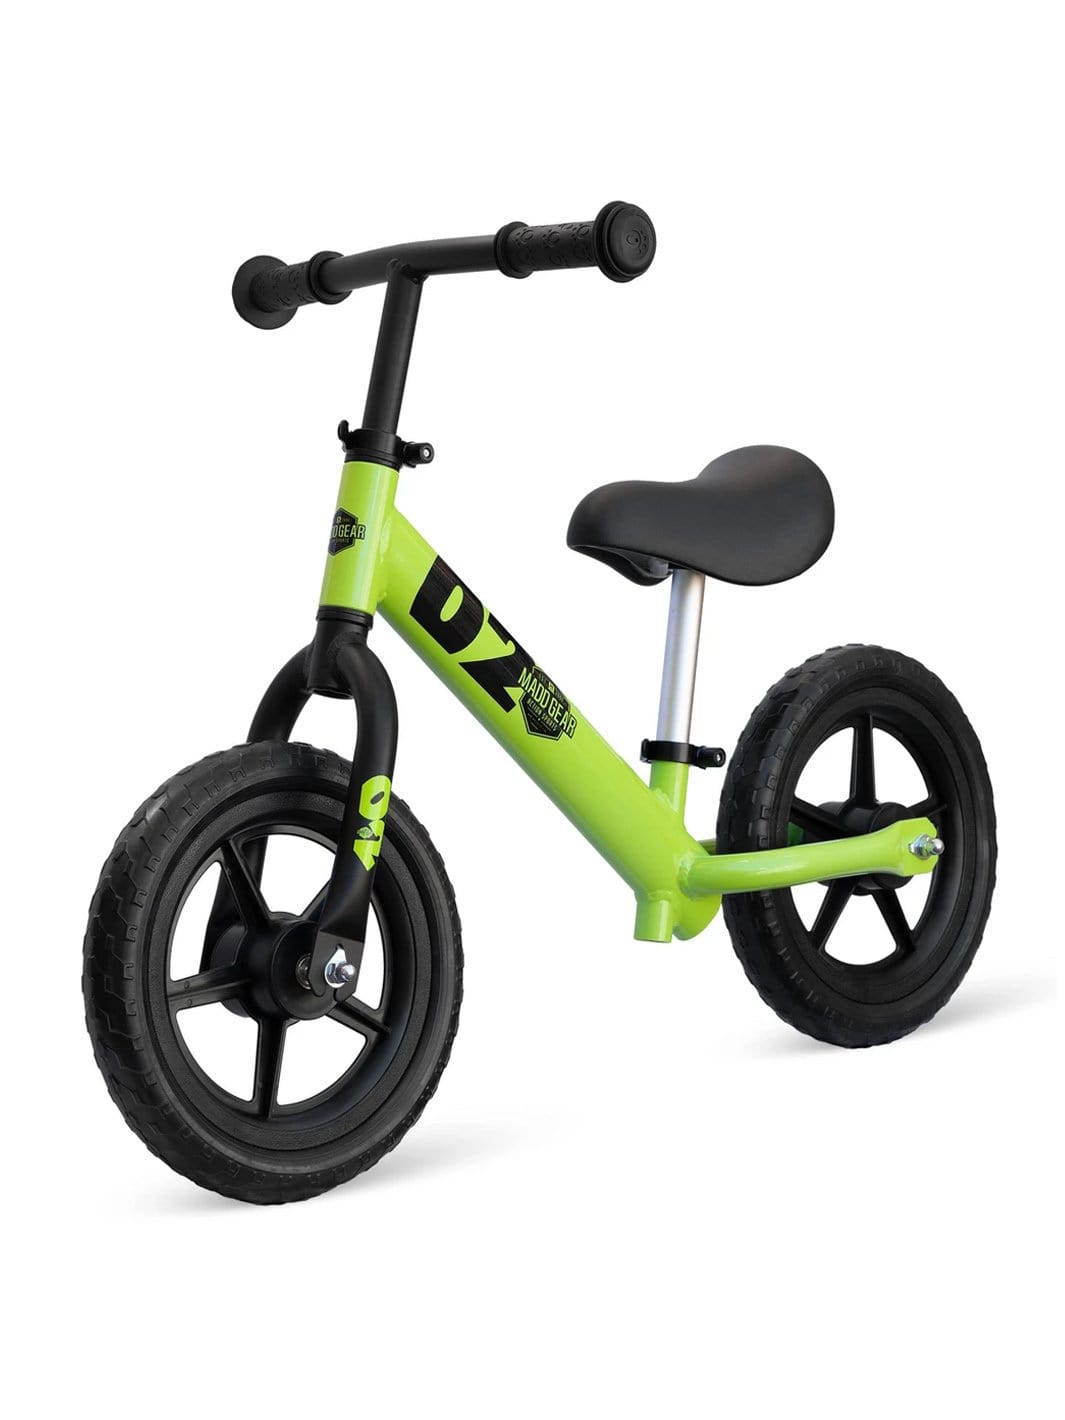 Madd Gear Kids Toddlers Balance Bike Foot to Floor Learn to Ride Green